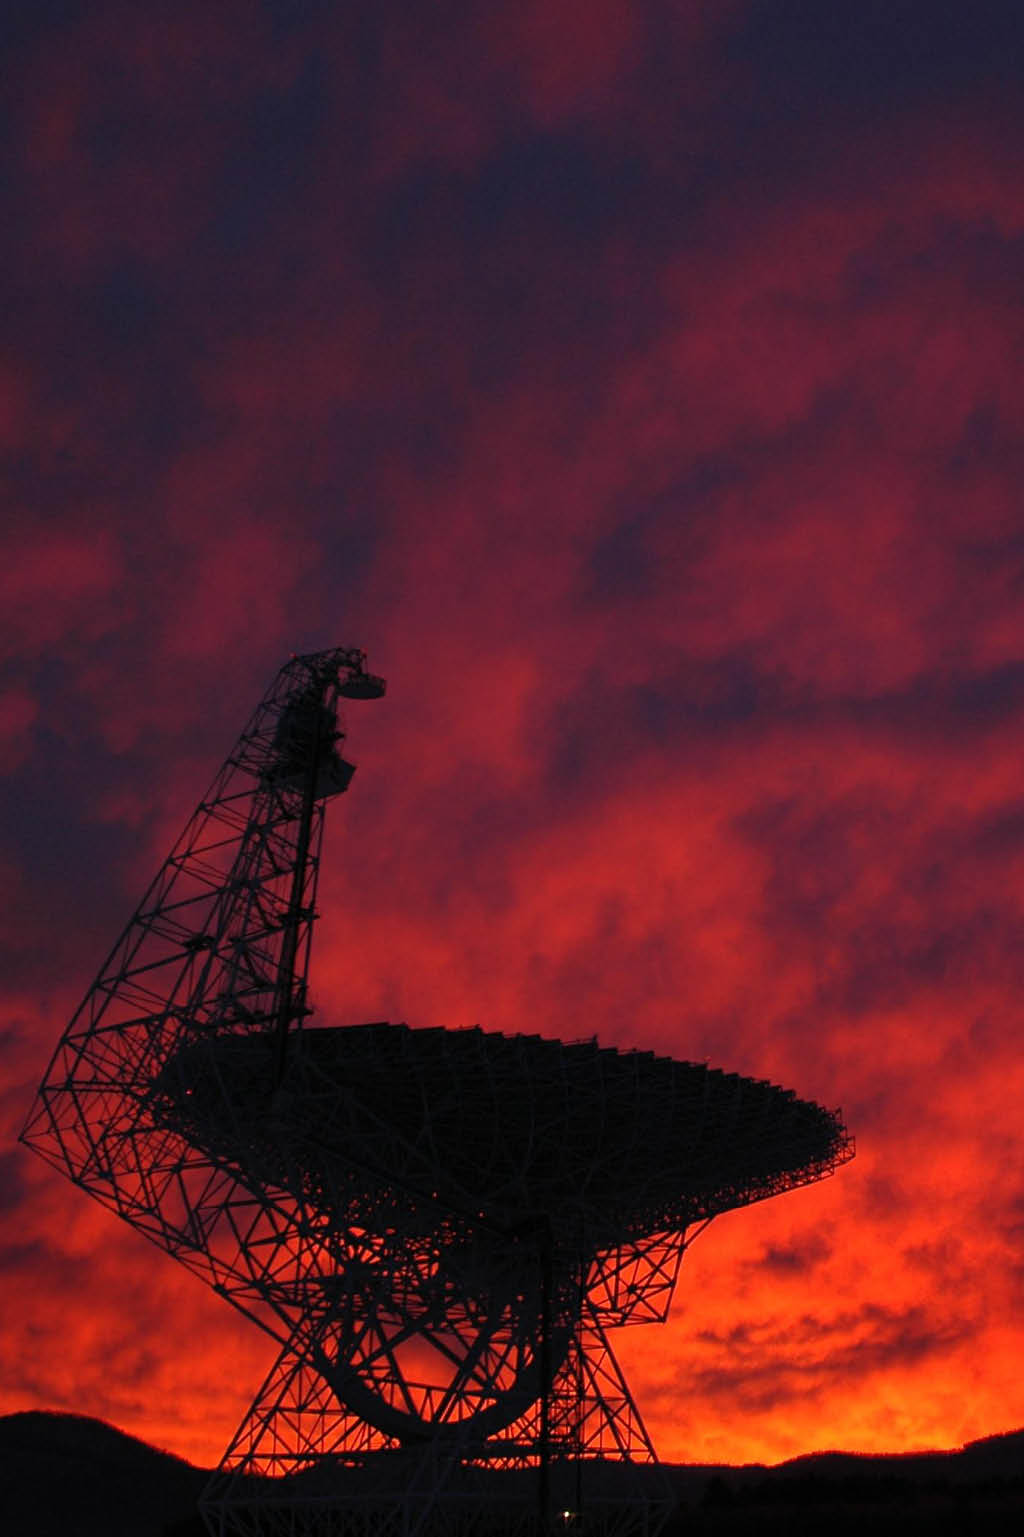 Green Bank telescope in front of colorful sunset